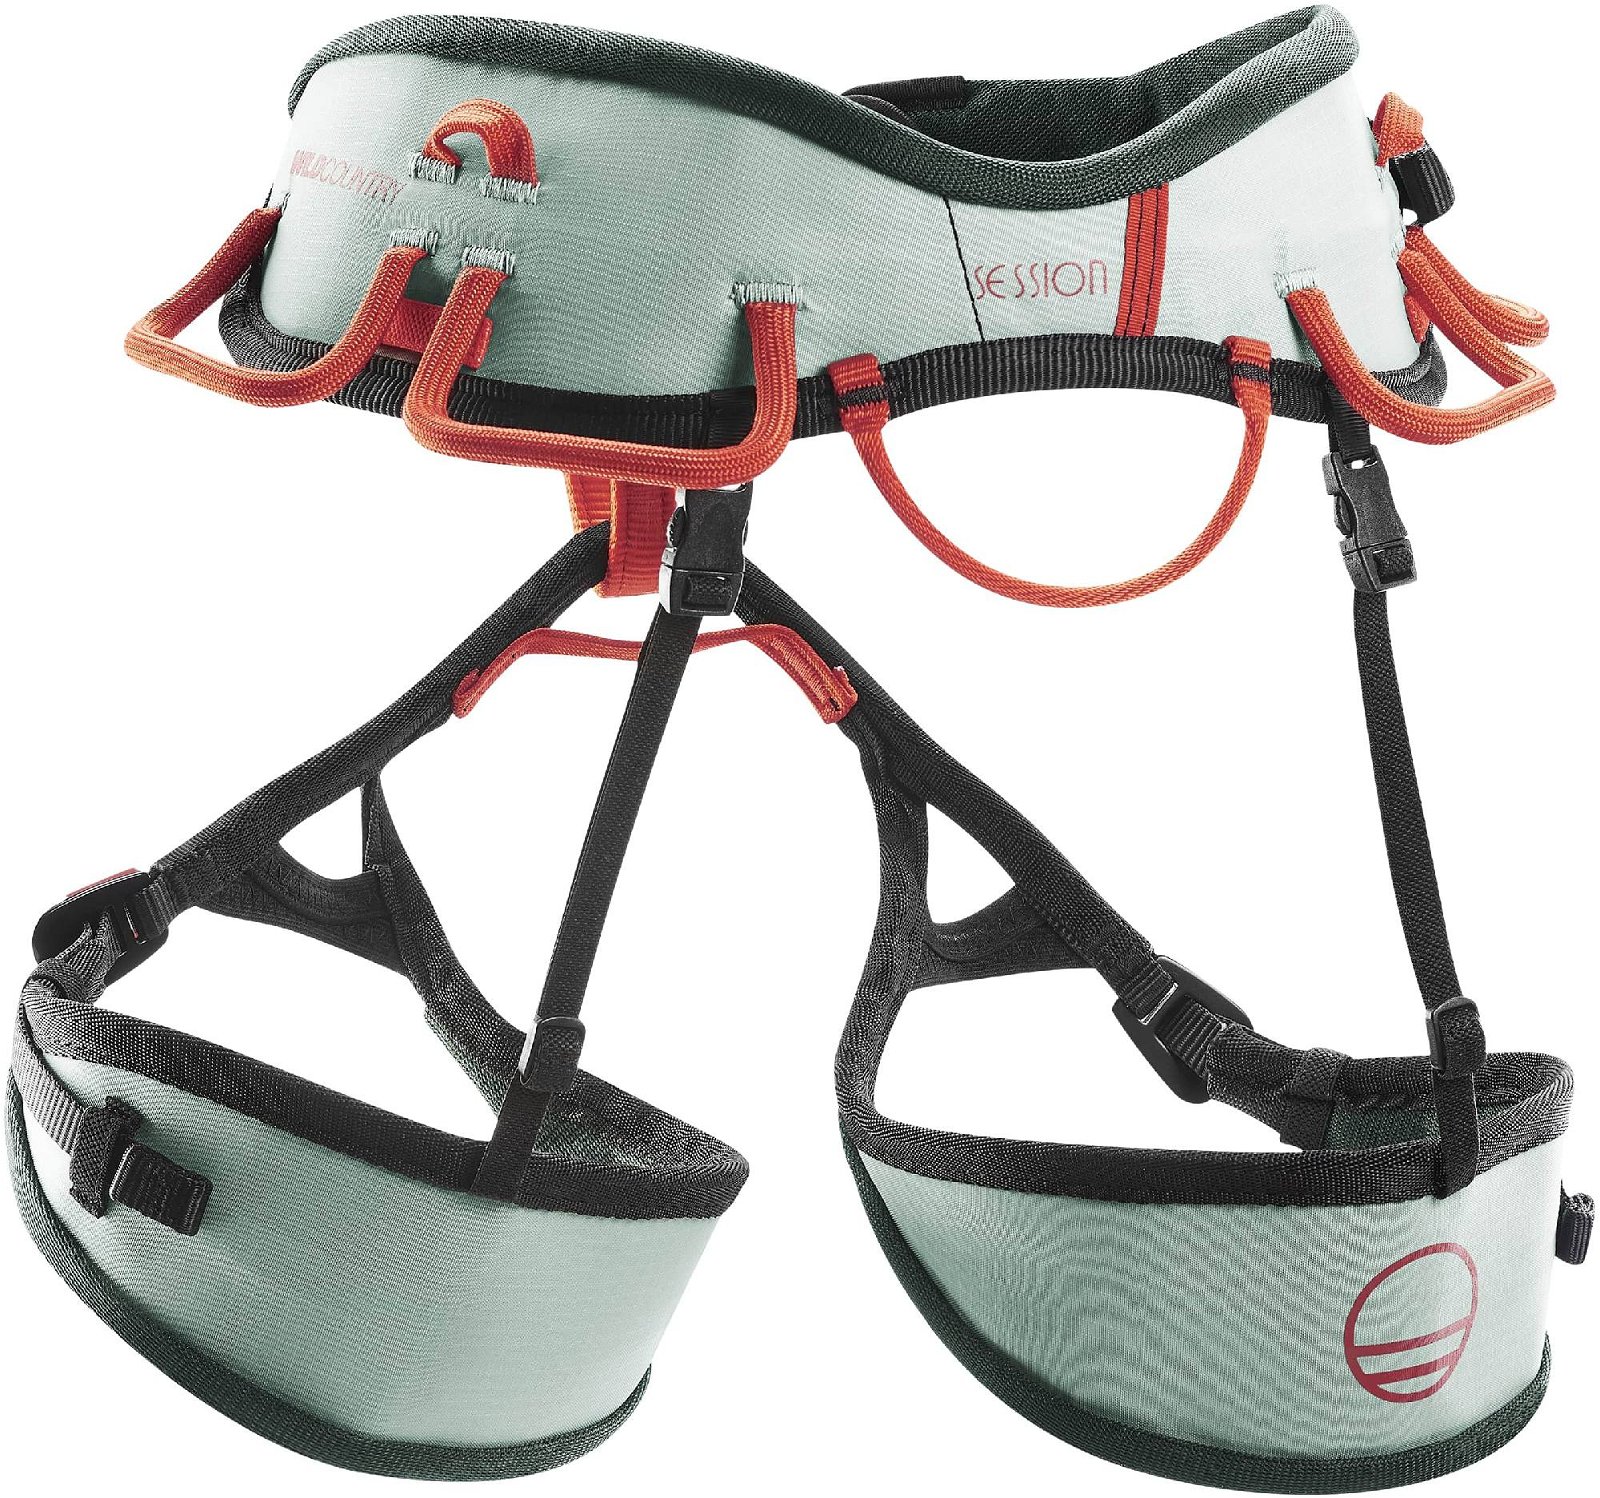 Wild Country Session Women's harness